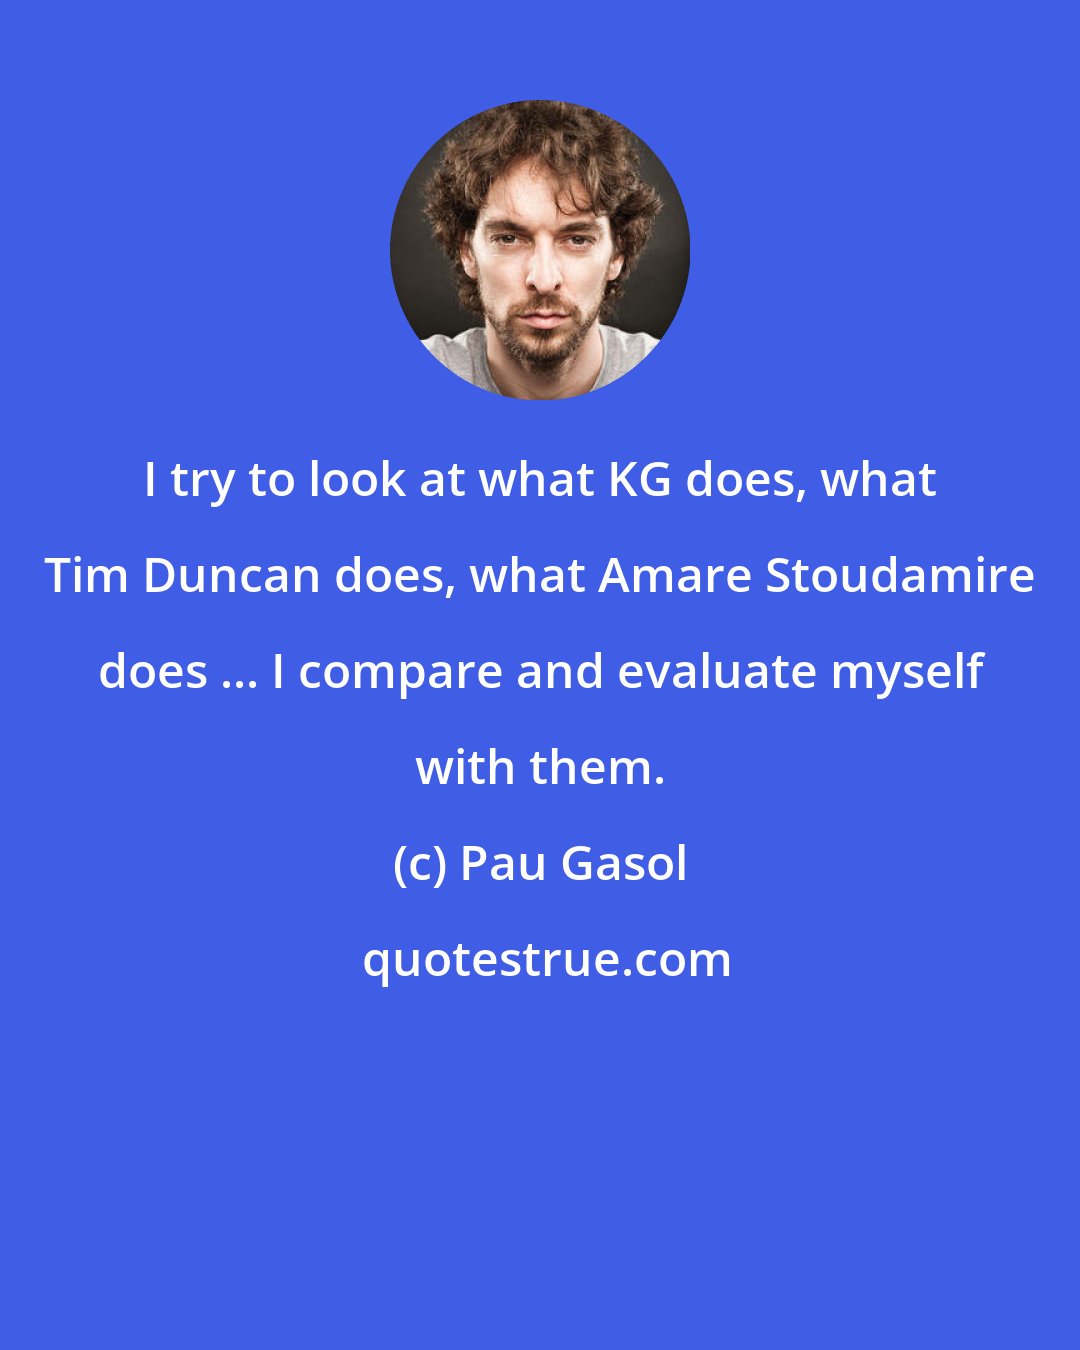 Pau Gasol: I try to look at what KG does, what Tim Duncan does, what Amare Stoudamire does ... I compare and evaluate myself with them.